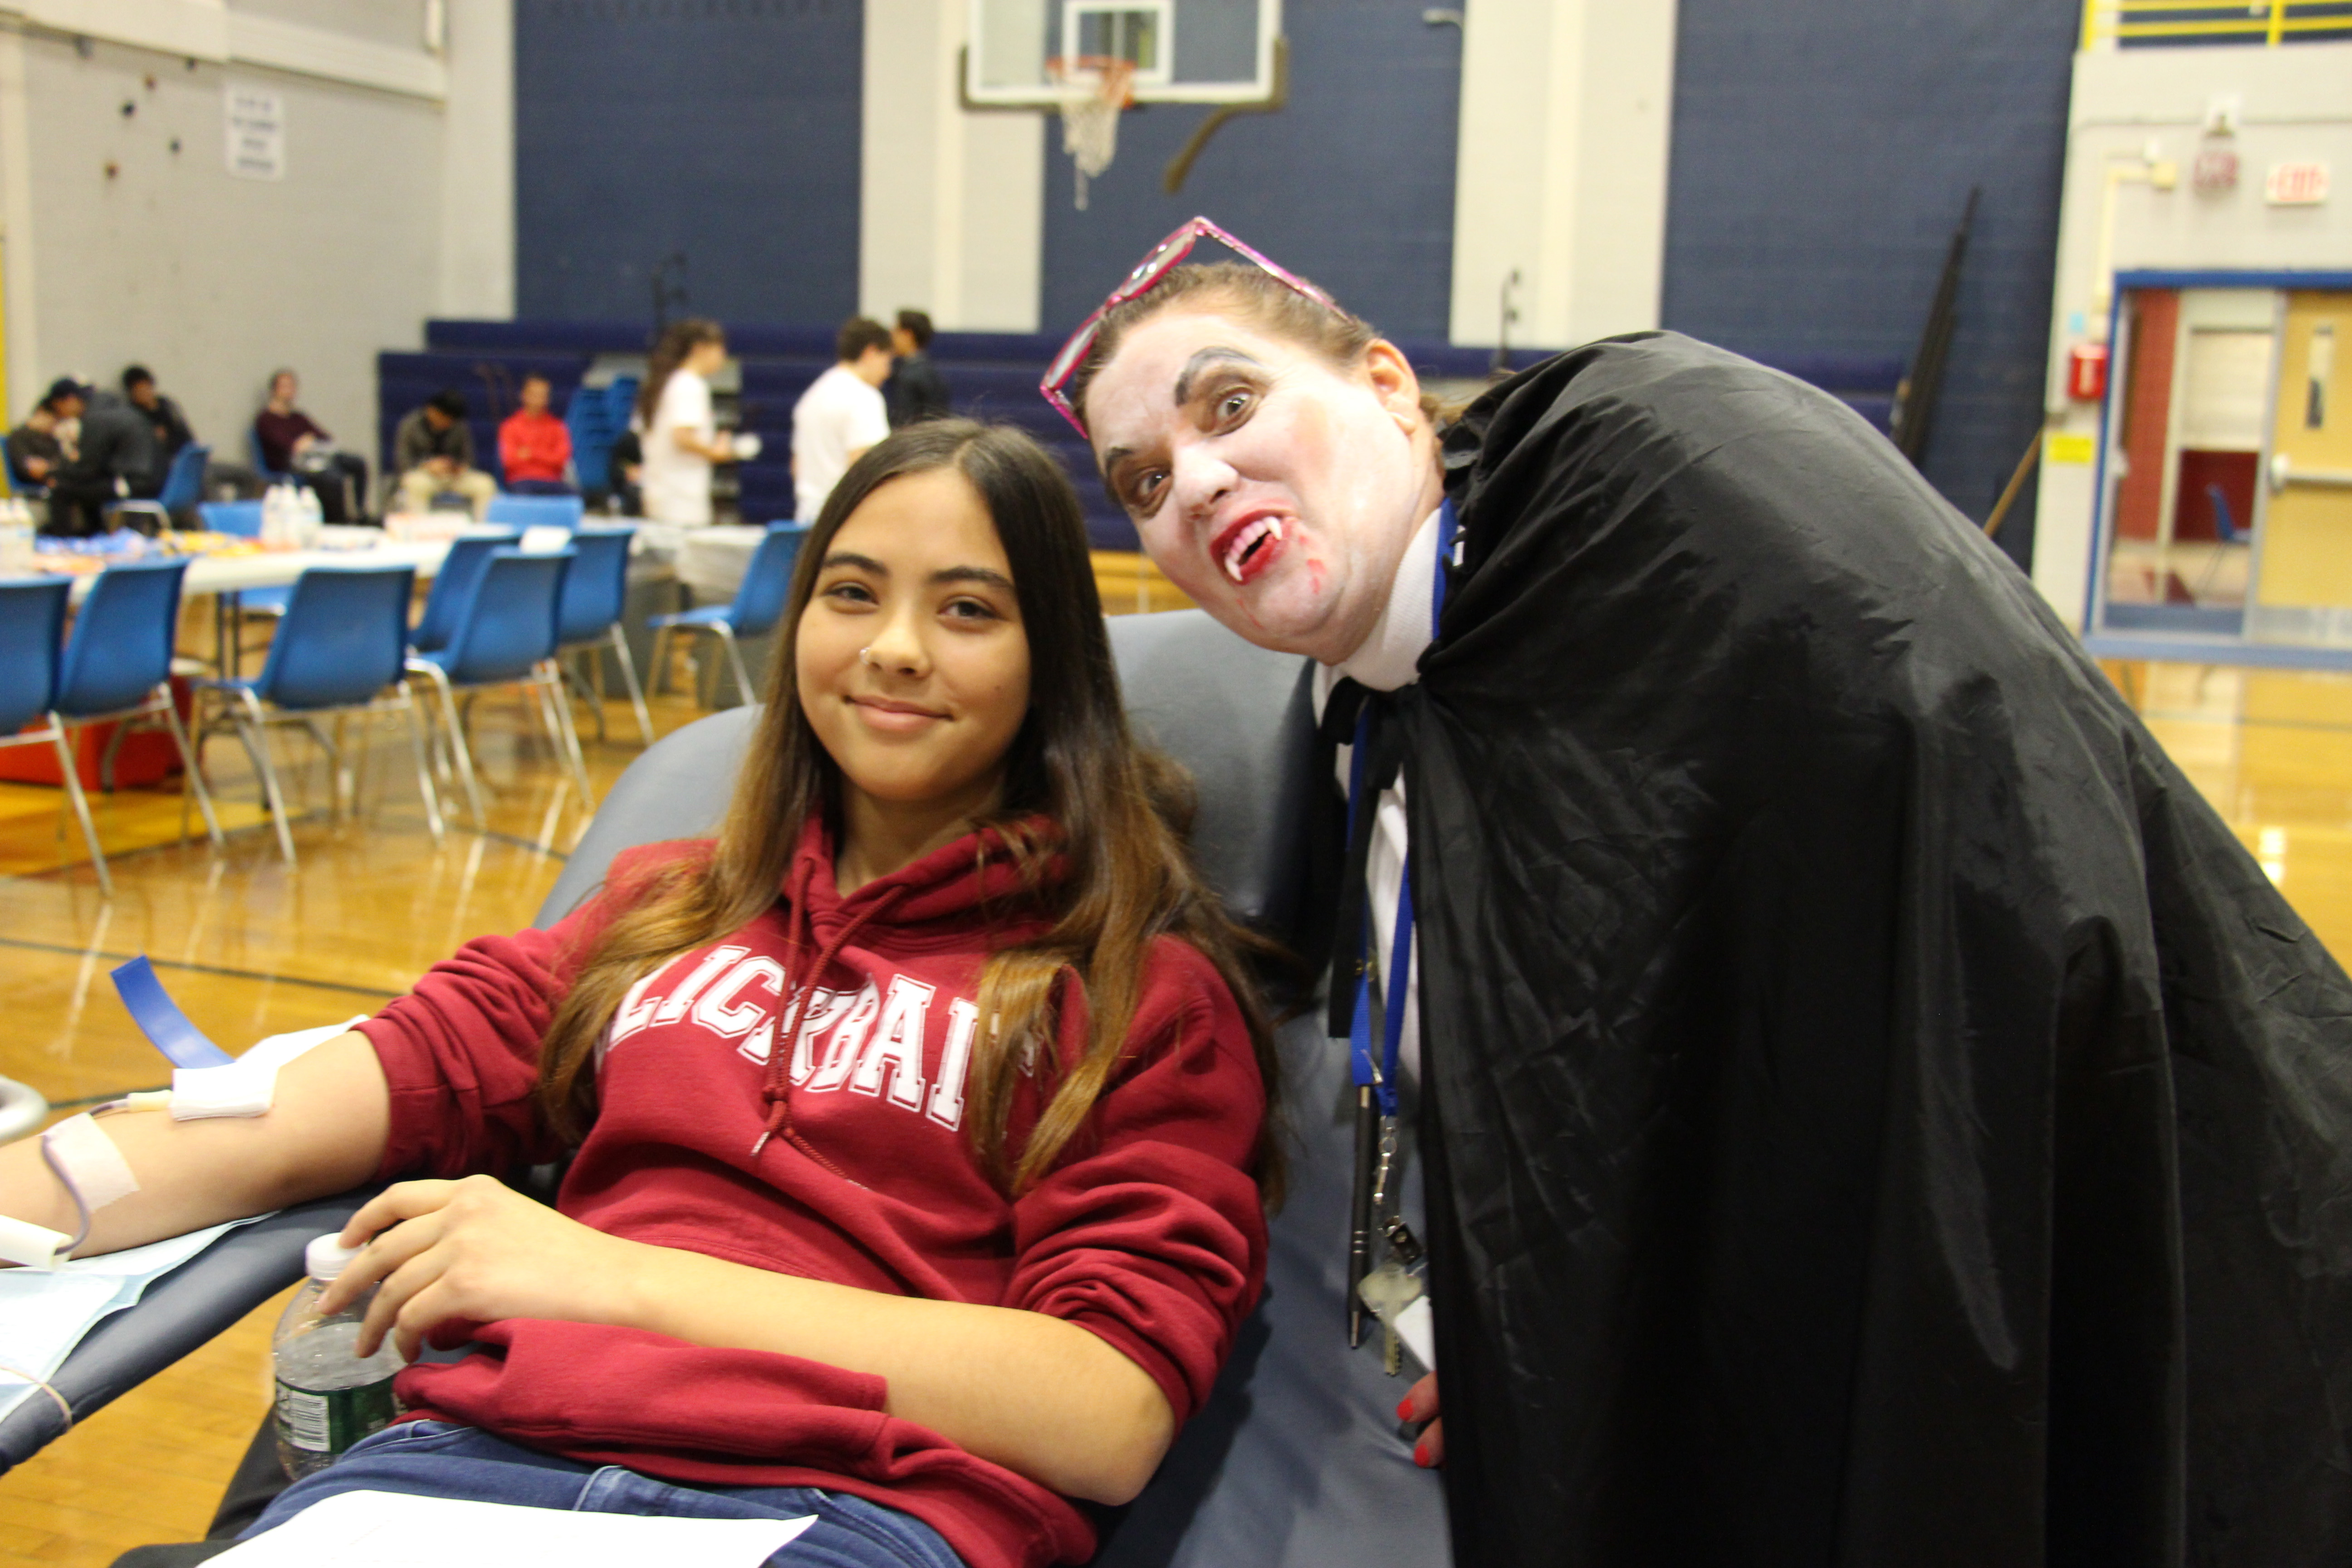 A woman dressed as a vampire stands near a student donating blood.